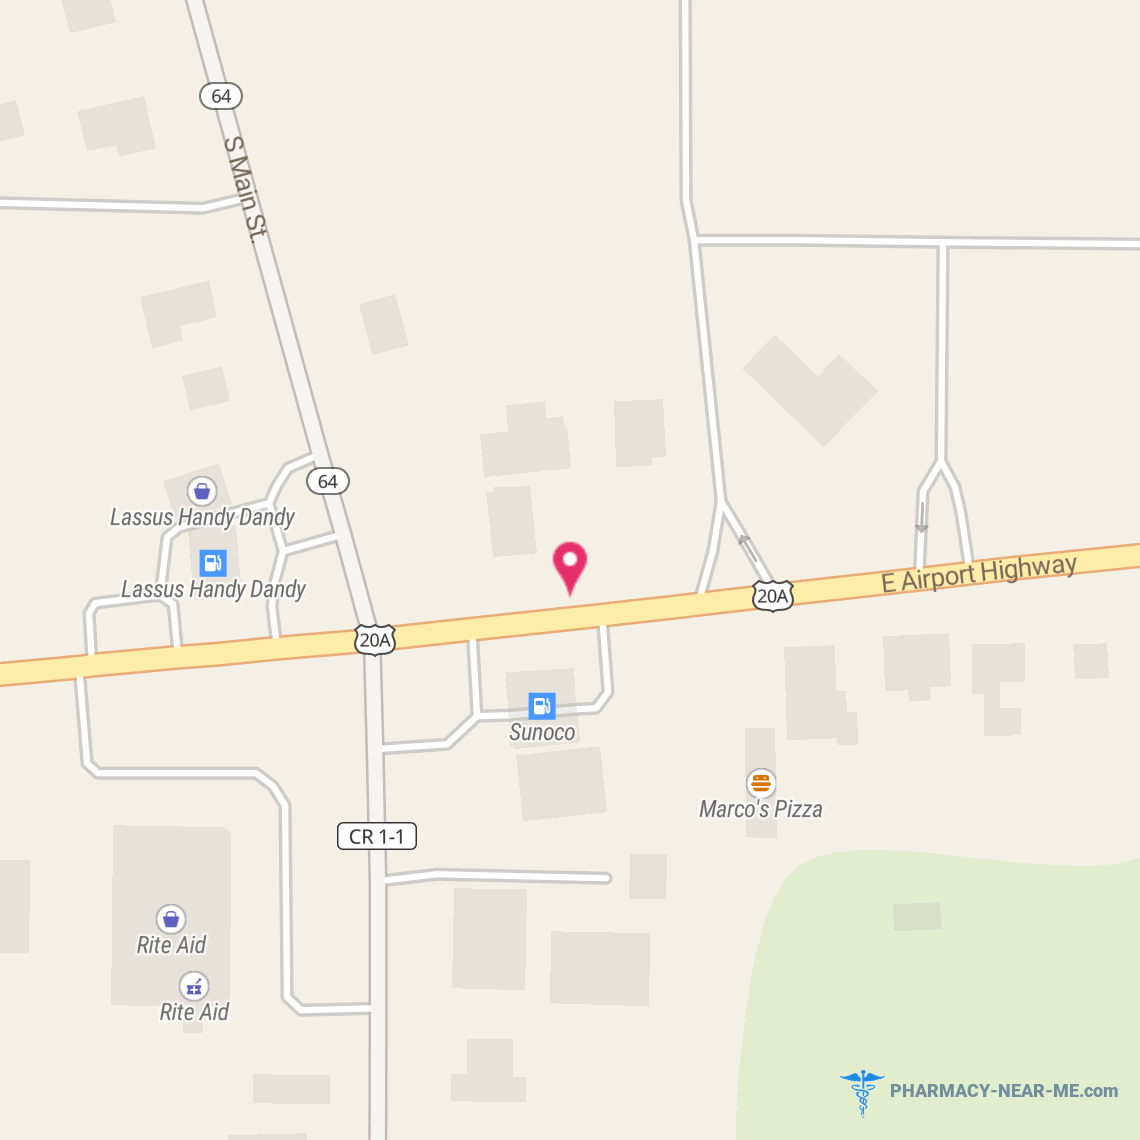 SWANTON PHARMACY - Pharmacy Hours, Phone, Reviews & Information: 151 East Airport Highway, Swanton, Ohio 43558, United States